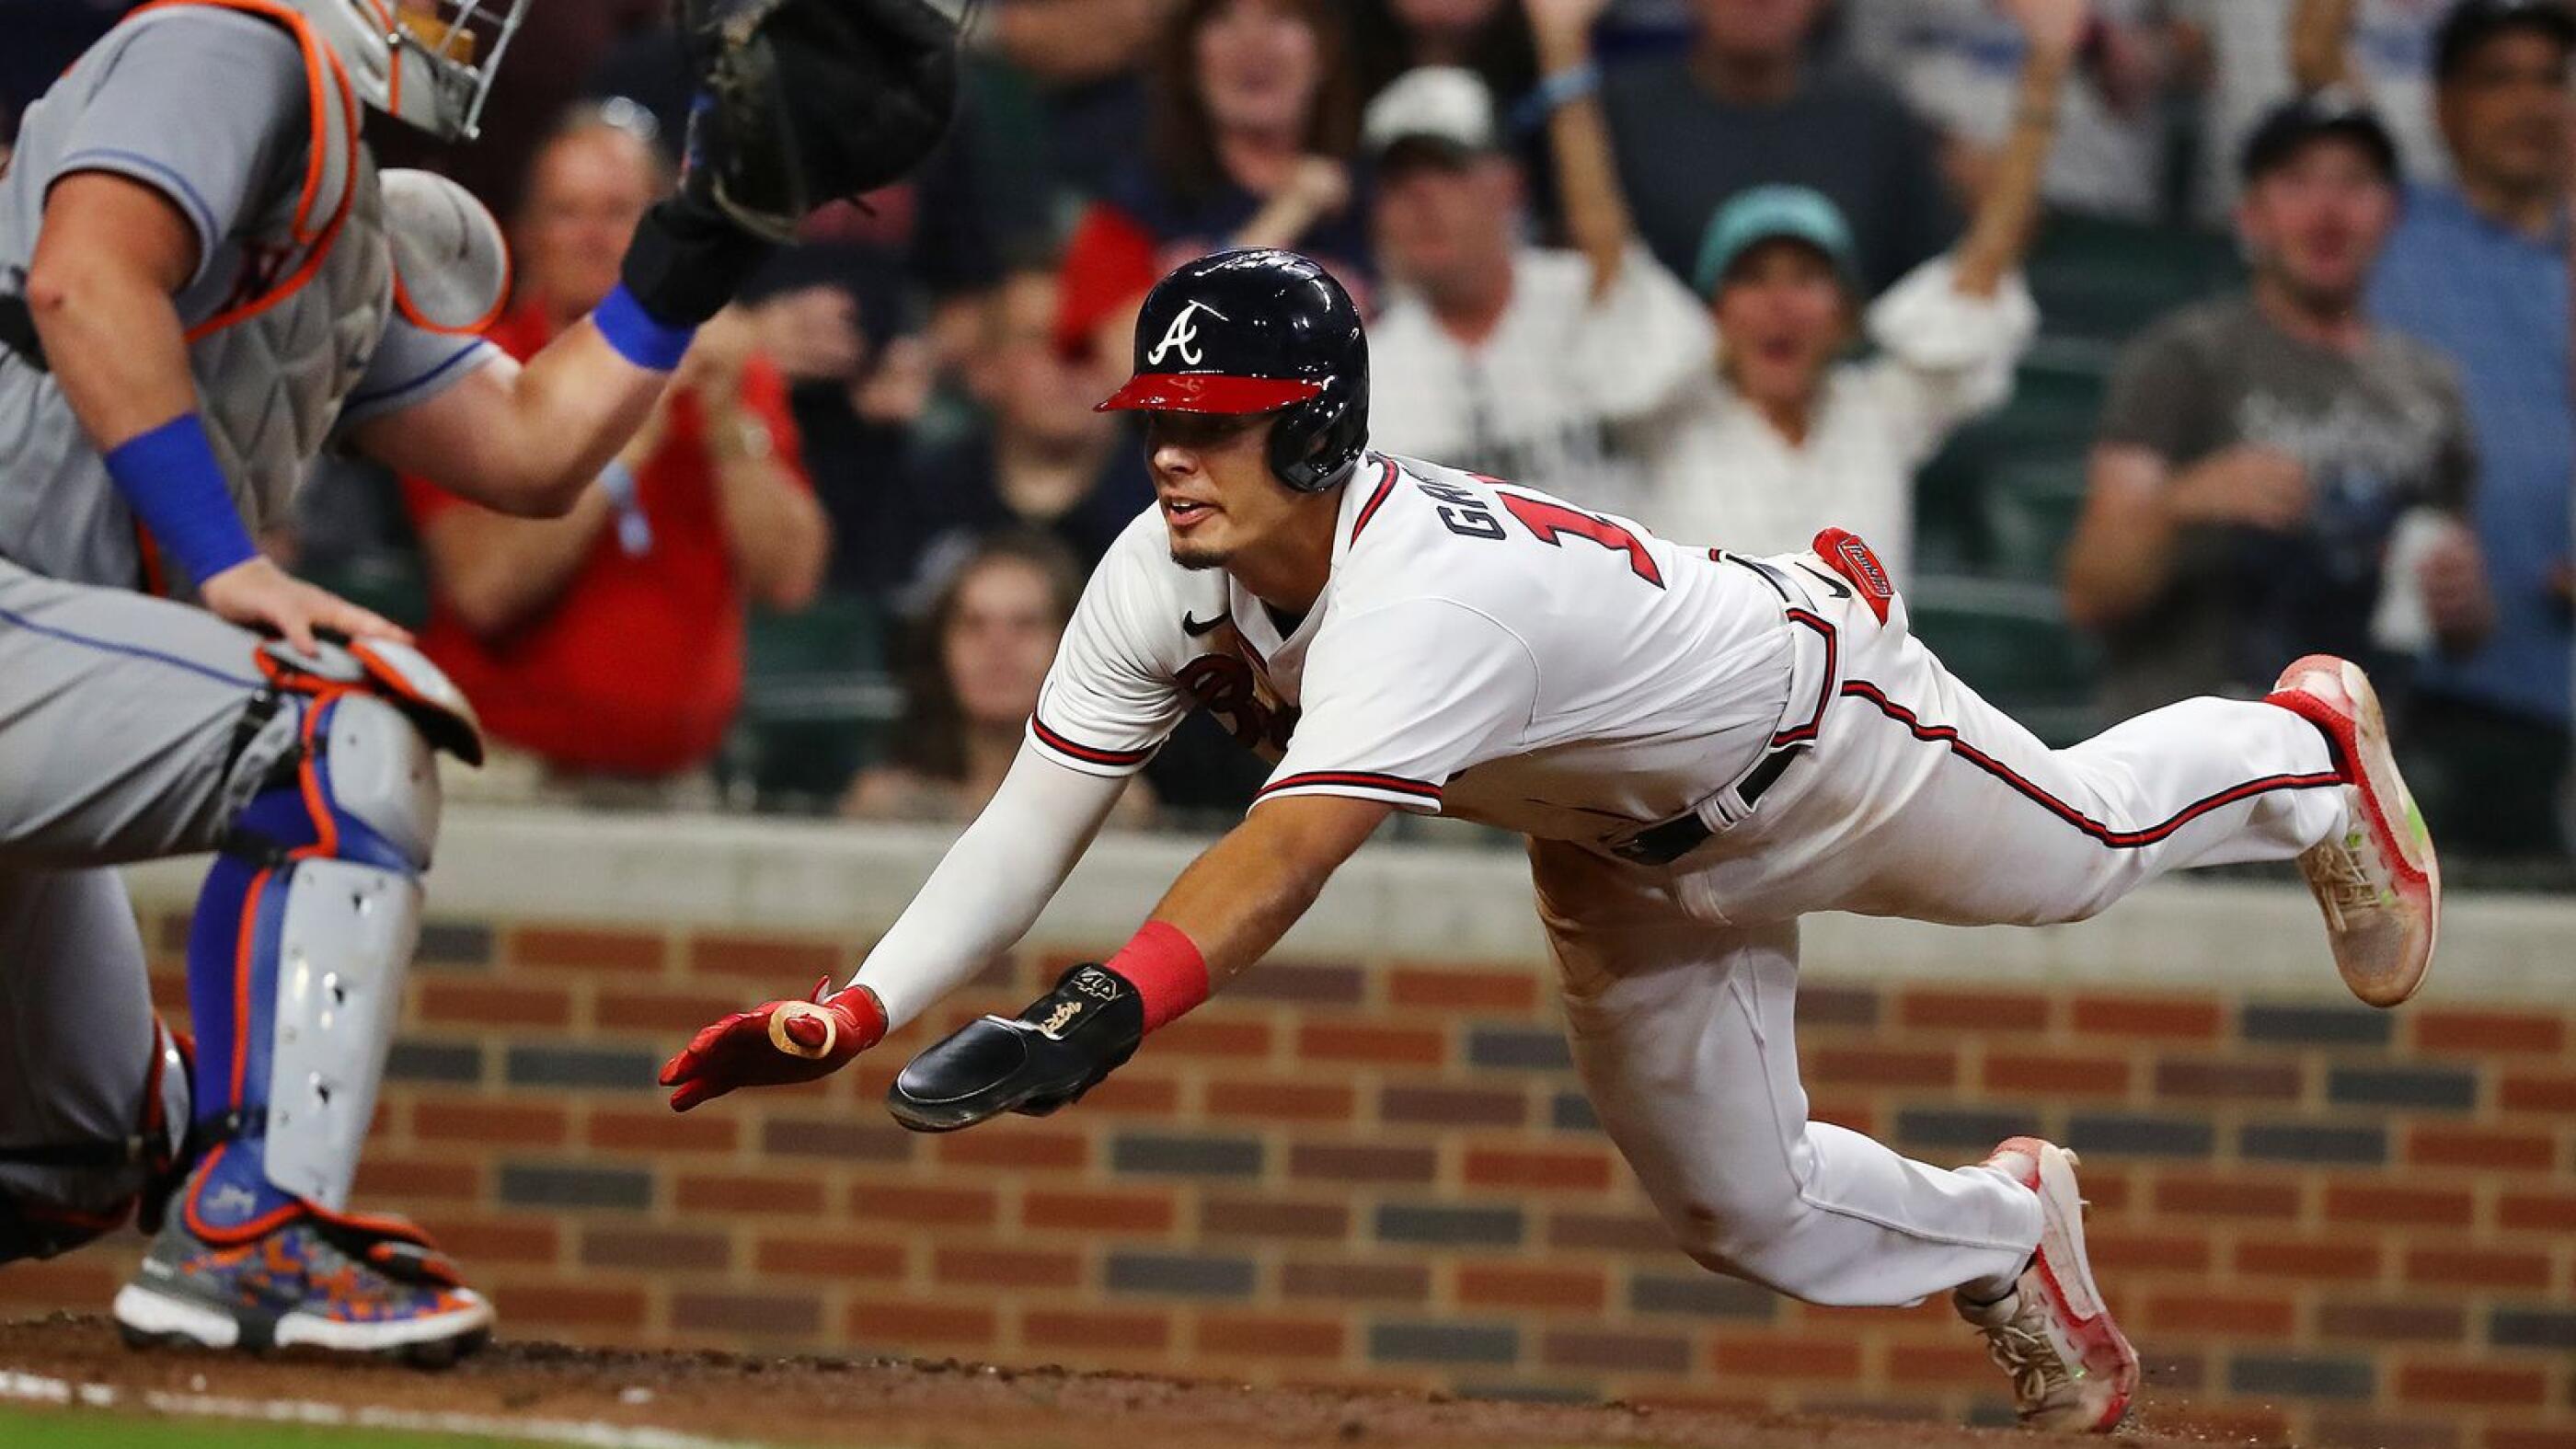 Fried, Harris lead Braves over deGrom, Mets to win series